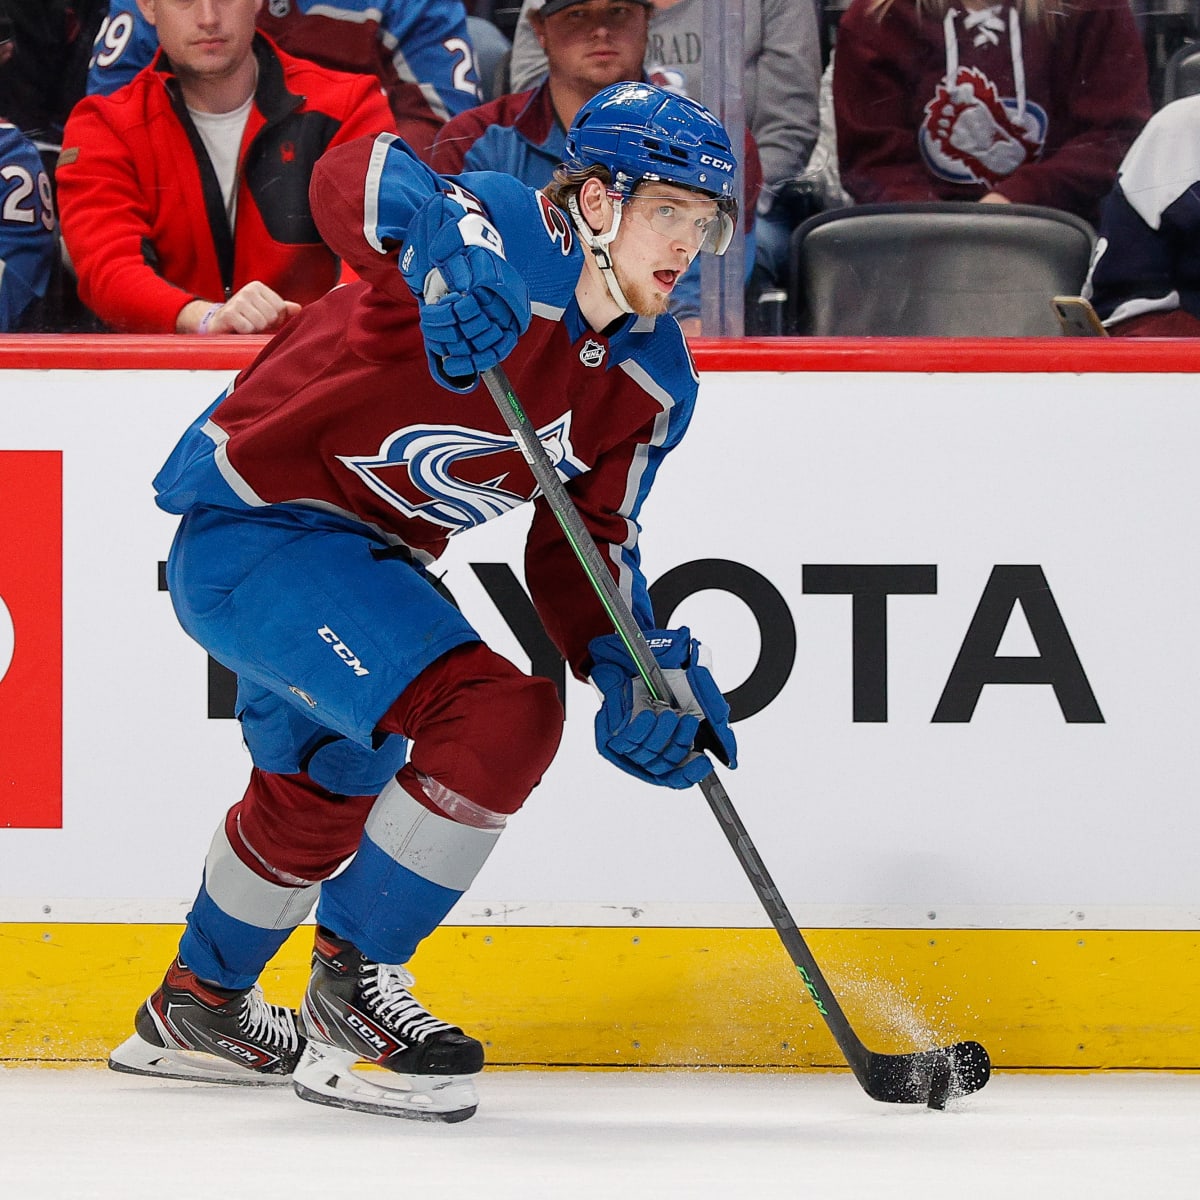 Avalanche's Bowen Byram plays well in Stanley Cup Playoffs debut